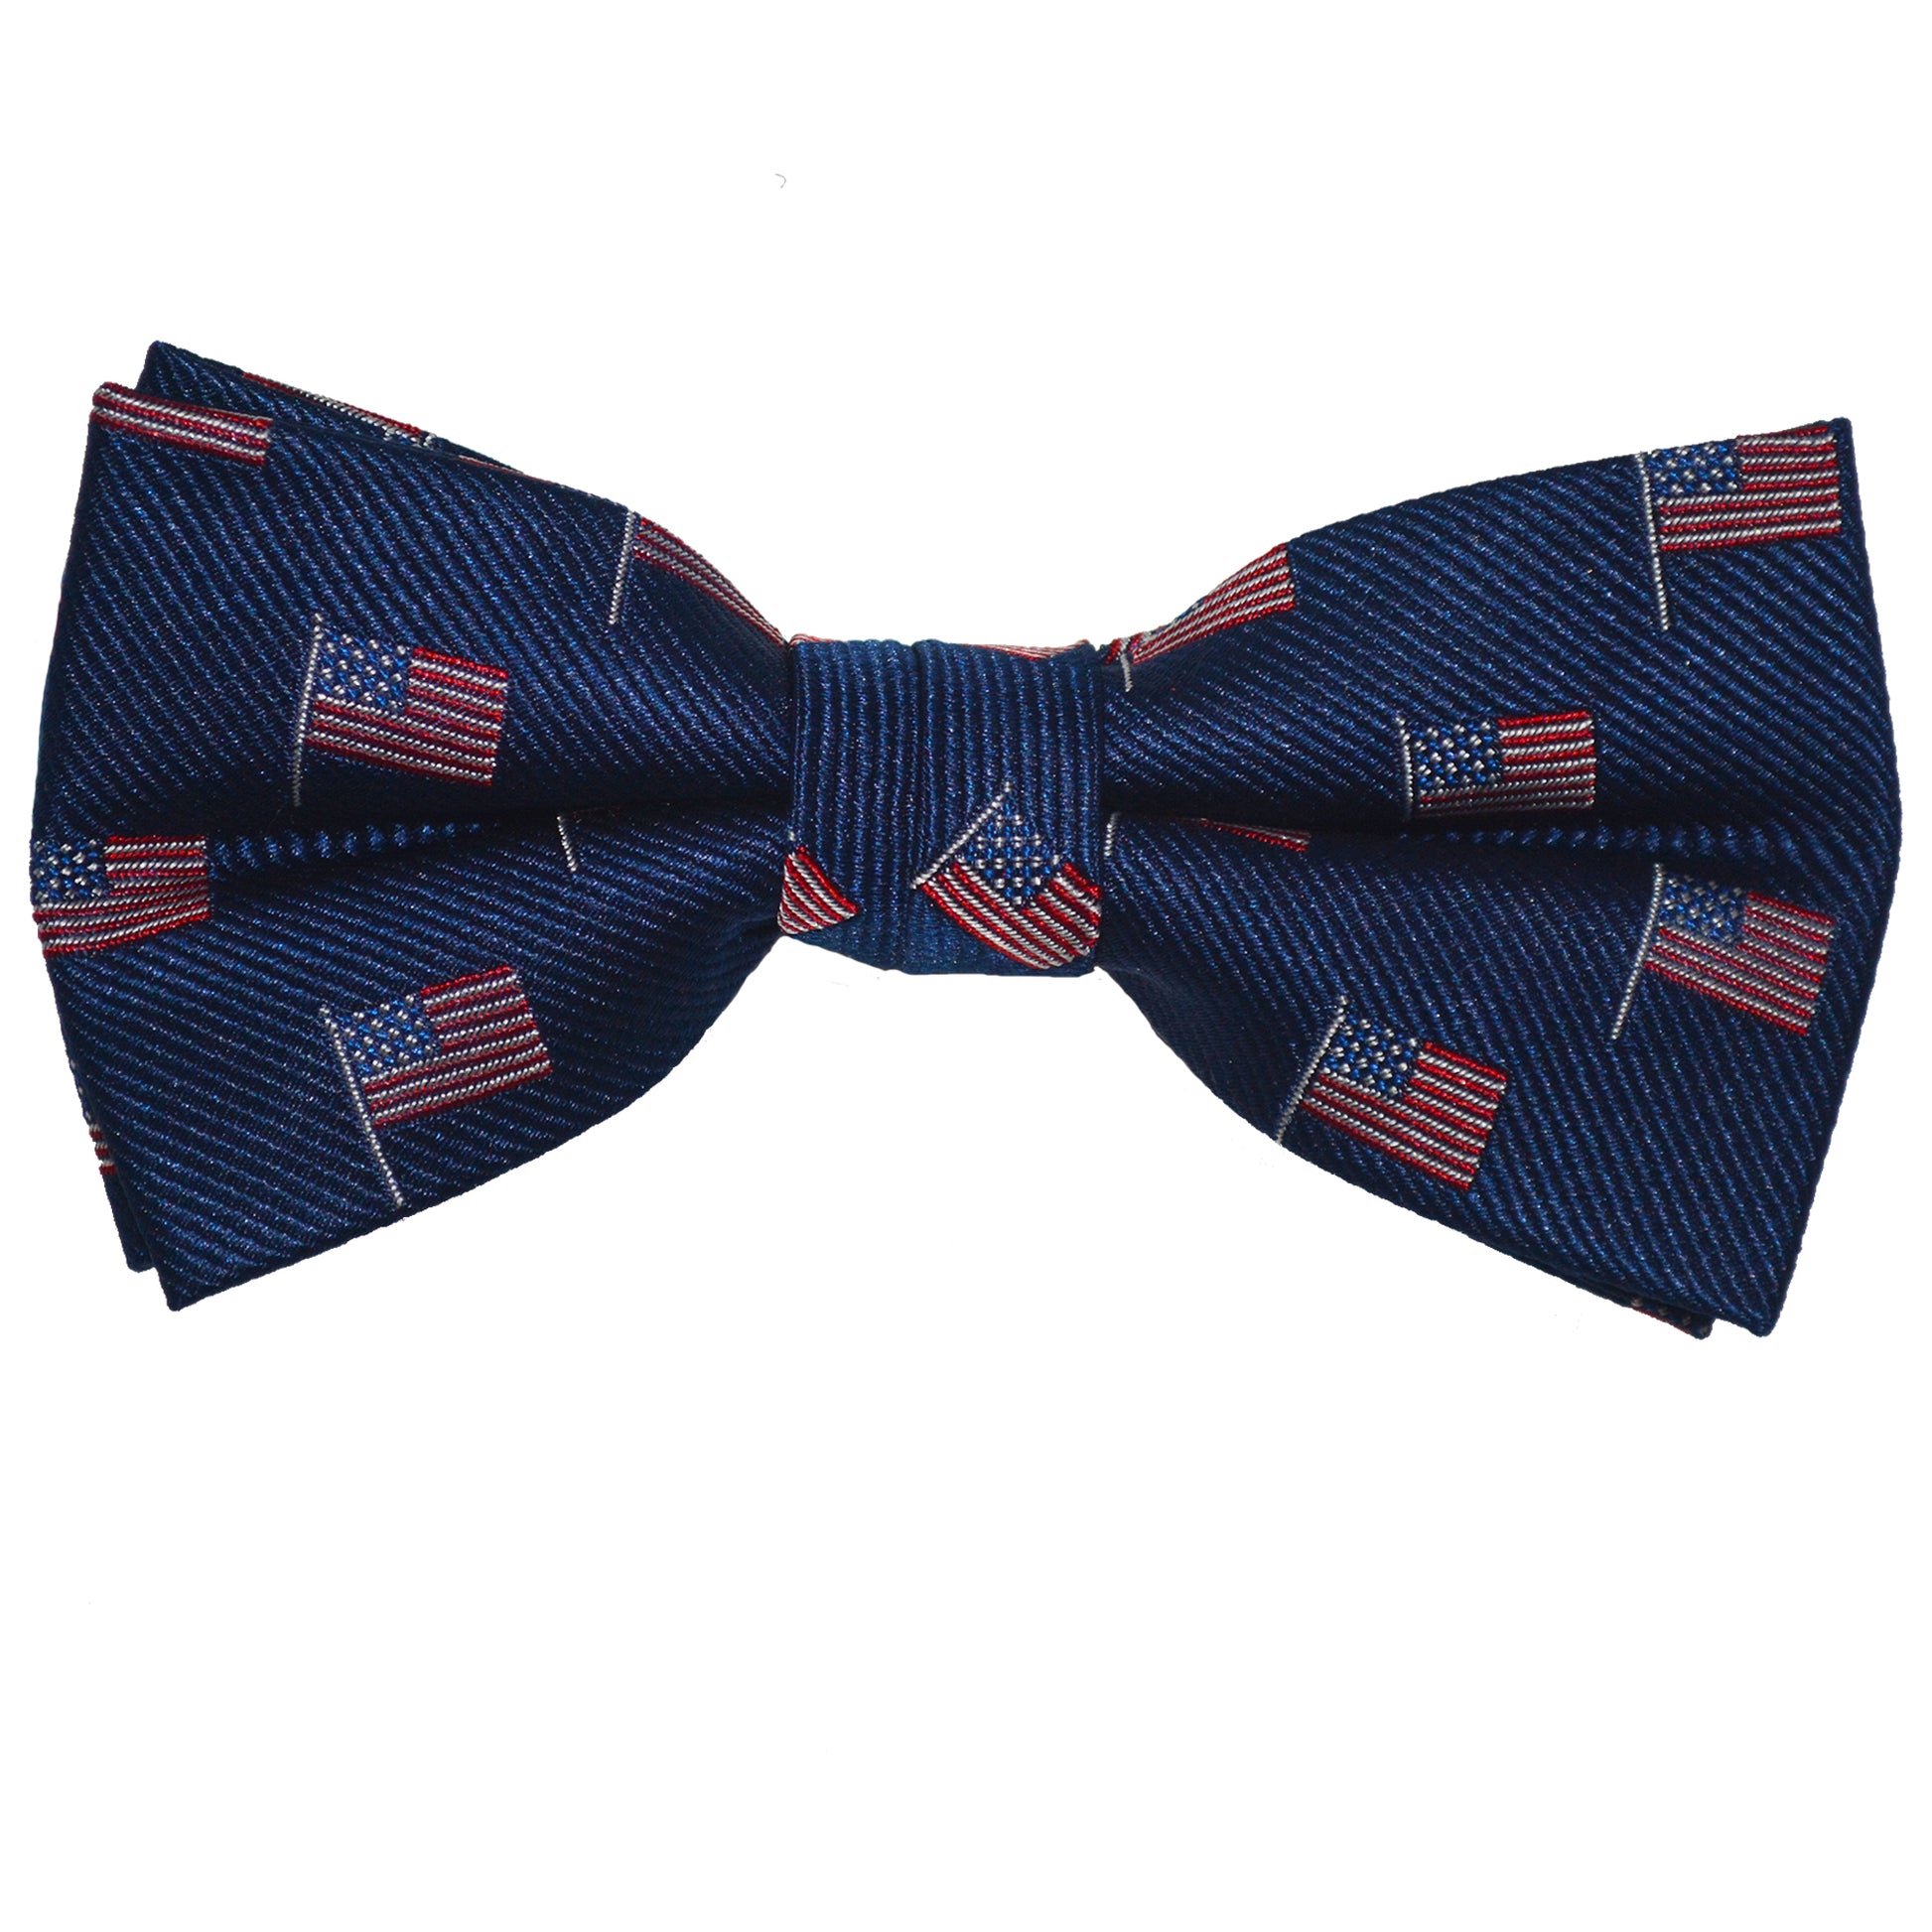 American Flag Bow Tie - Navy, Woven Silk, Pre-Tied for Kids - SummerTies